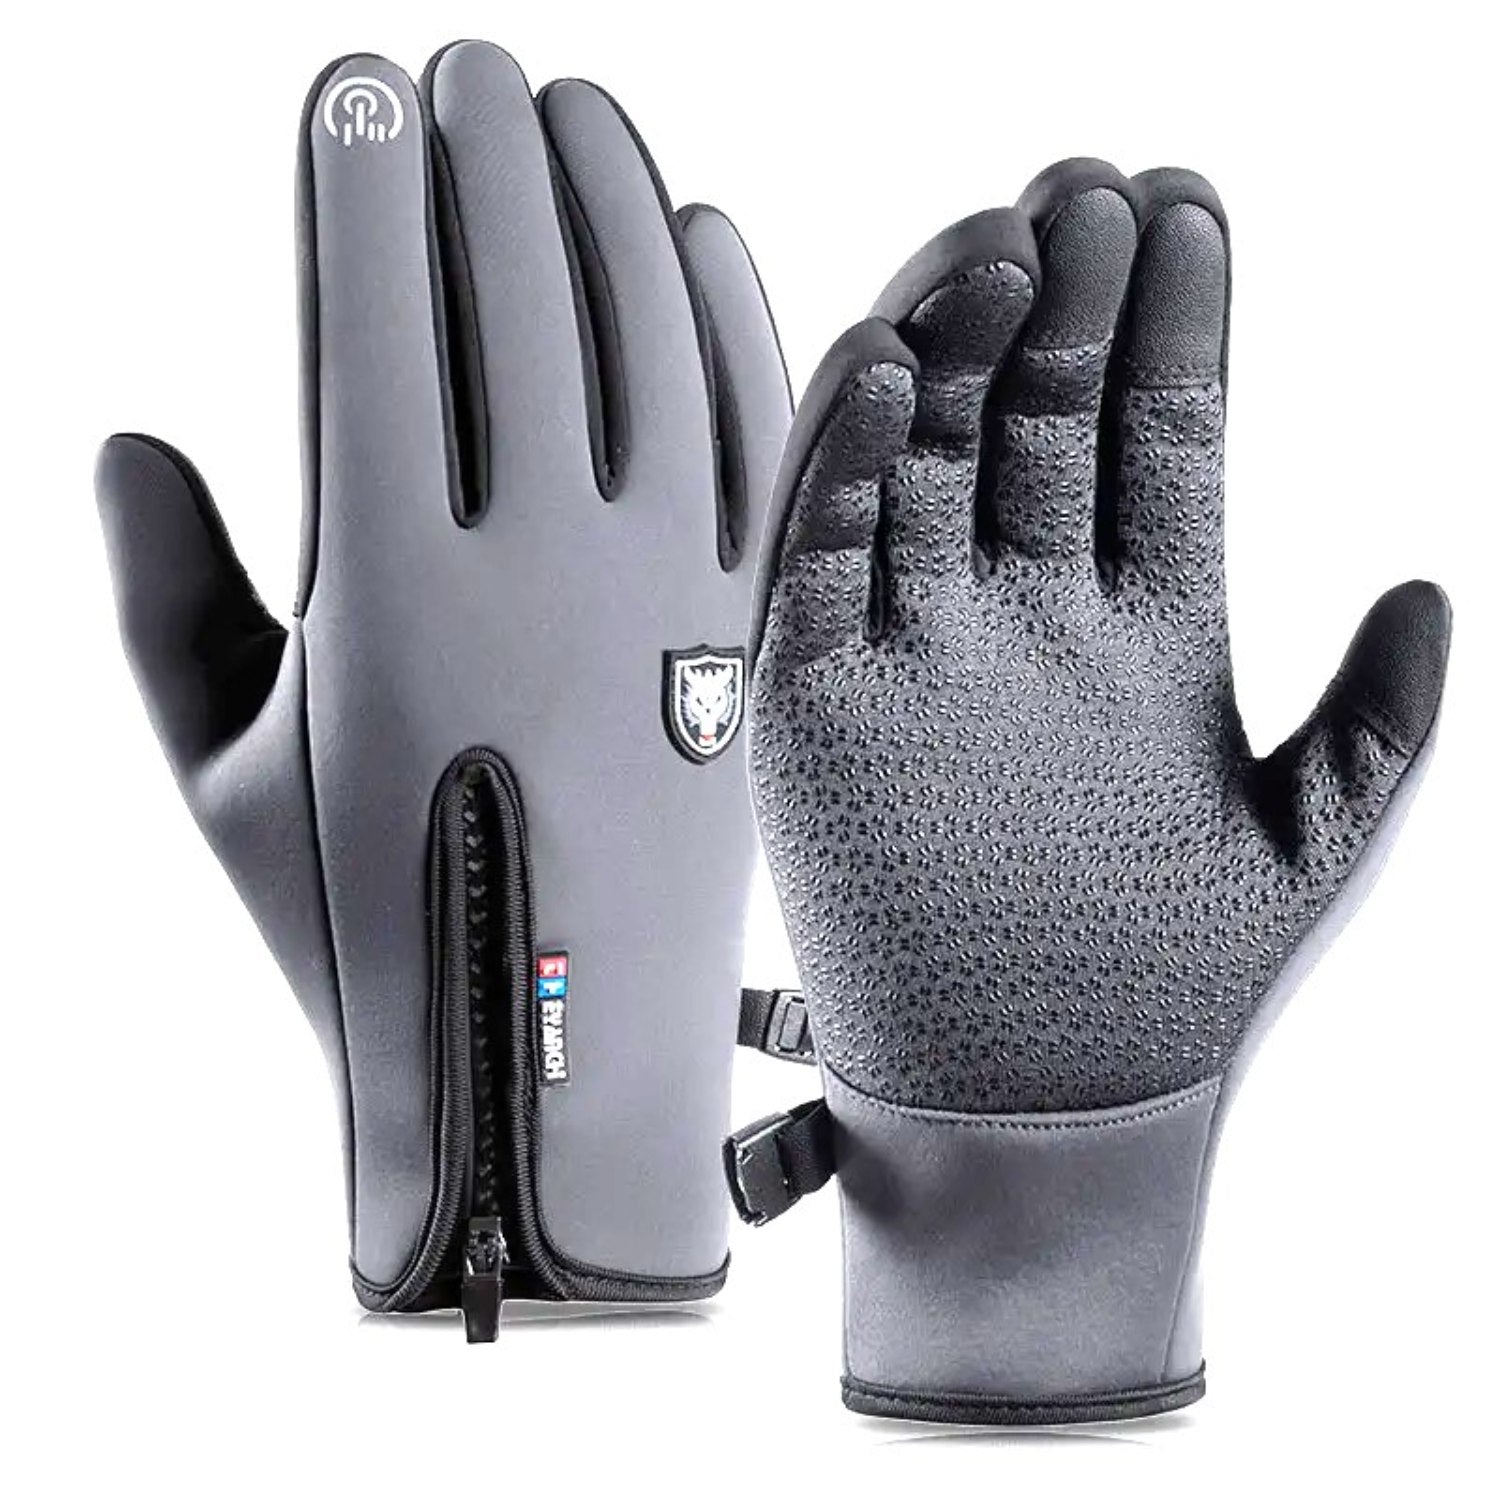 Buy Gokyo Kaza Winter Windproof Gloves with Zipper Grey | Cold Weather Gloves at Gokyo Outdoor Clothing & Gear